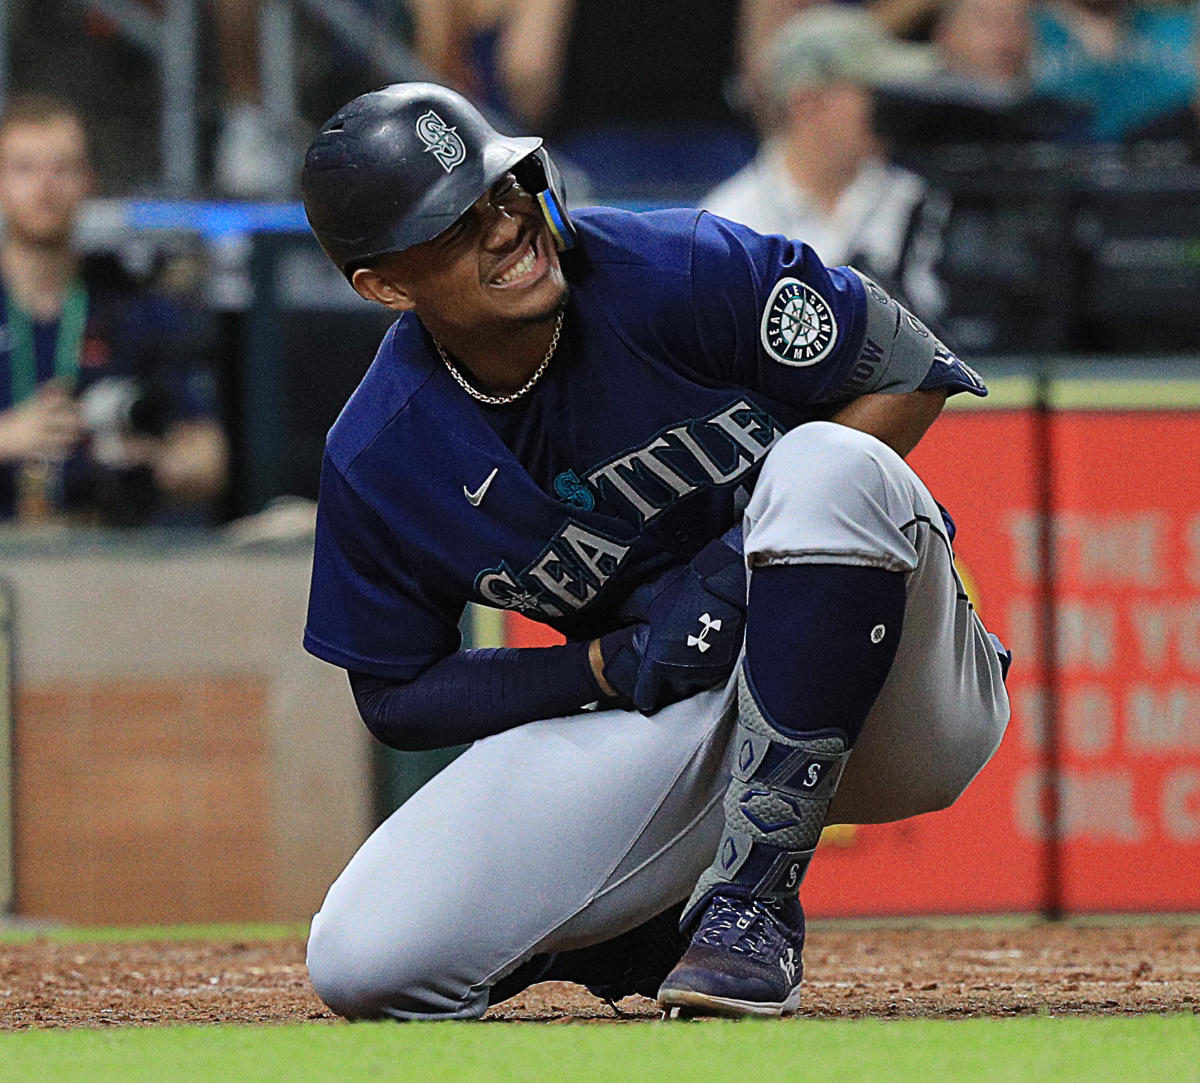 Julio Rodriguez: Top prospect, 21, thrilled to make Mariners roster